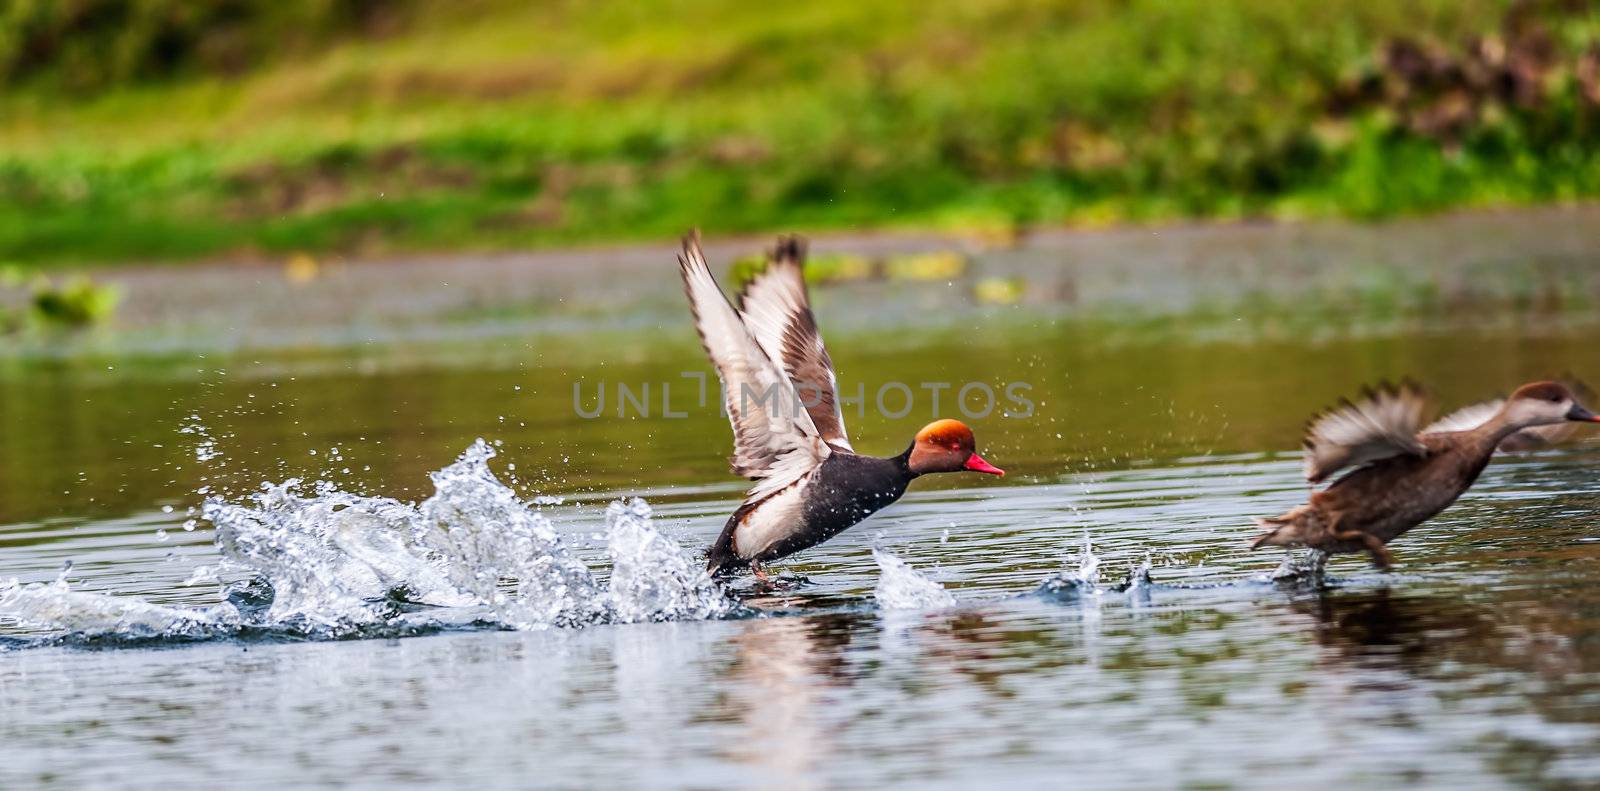 Red-crested Pochard,migratory, bird, Diving duck, Rhodonessa rufina, taking off water, copy space

